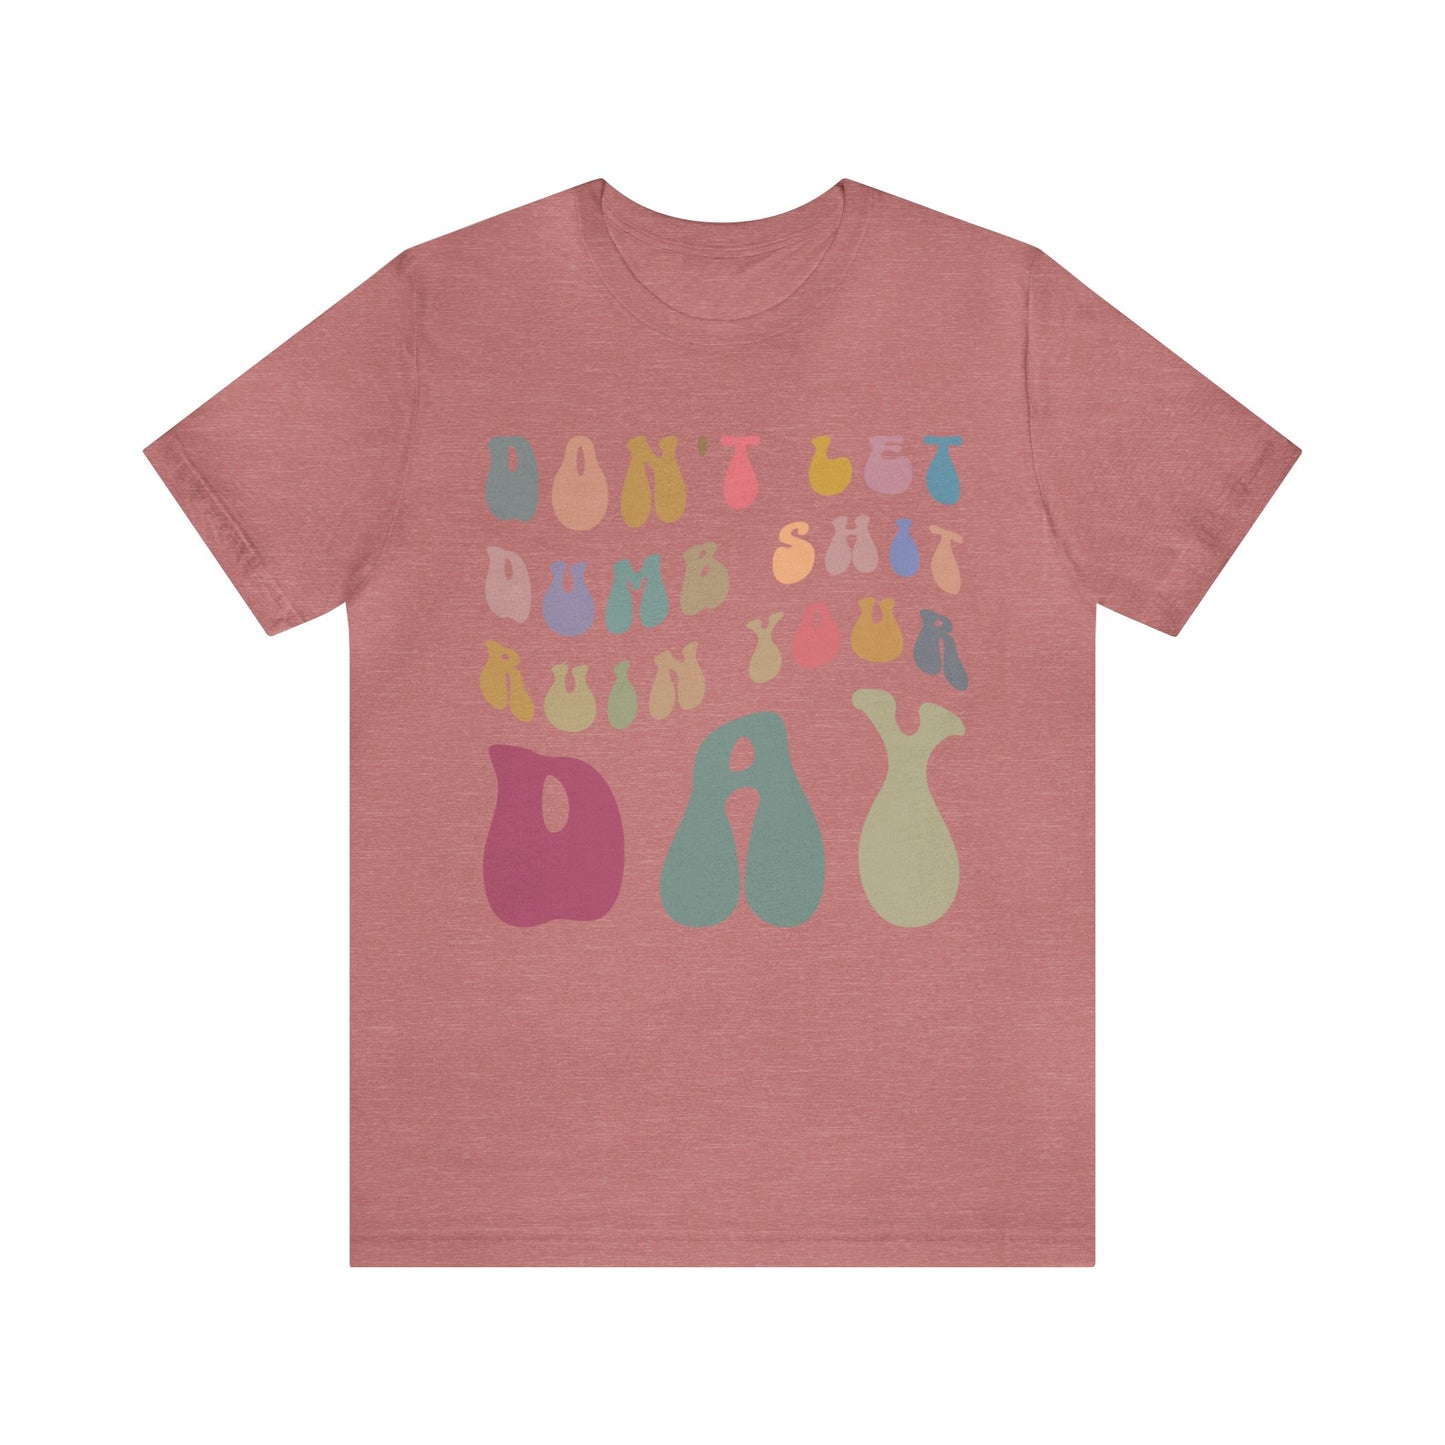 Don't Let Dumb Shit Ruin Your Day Shirt, Motivational Therapy Shirt, Mental Health Awareness Shirt, Funny Shirt for Women, T1185